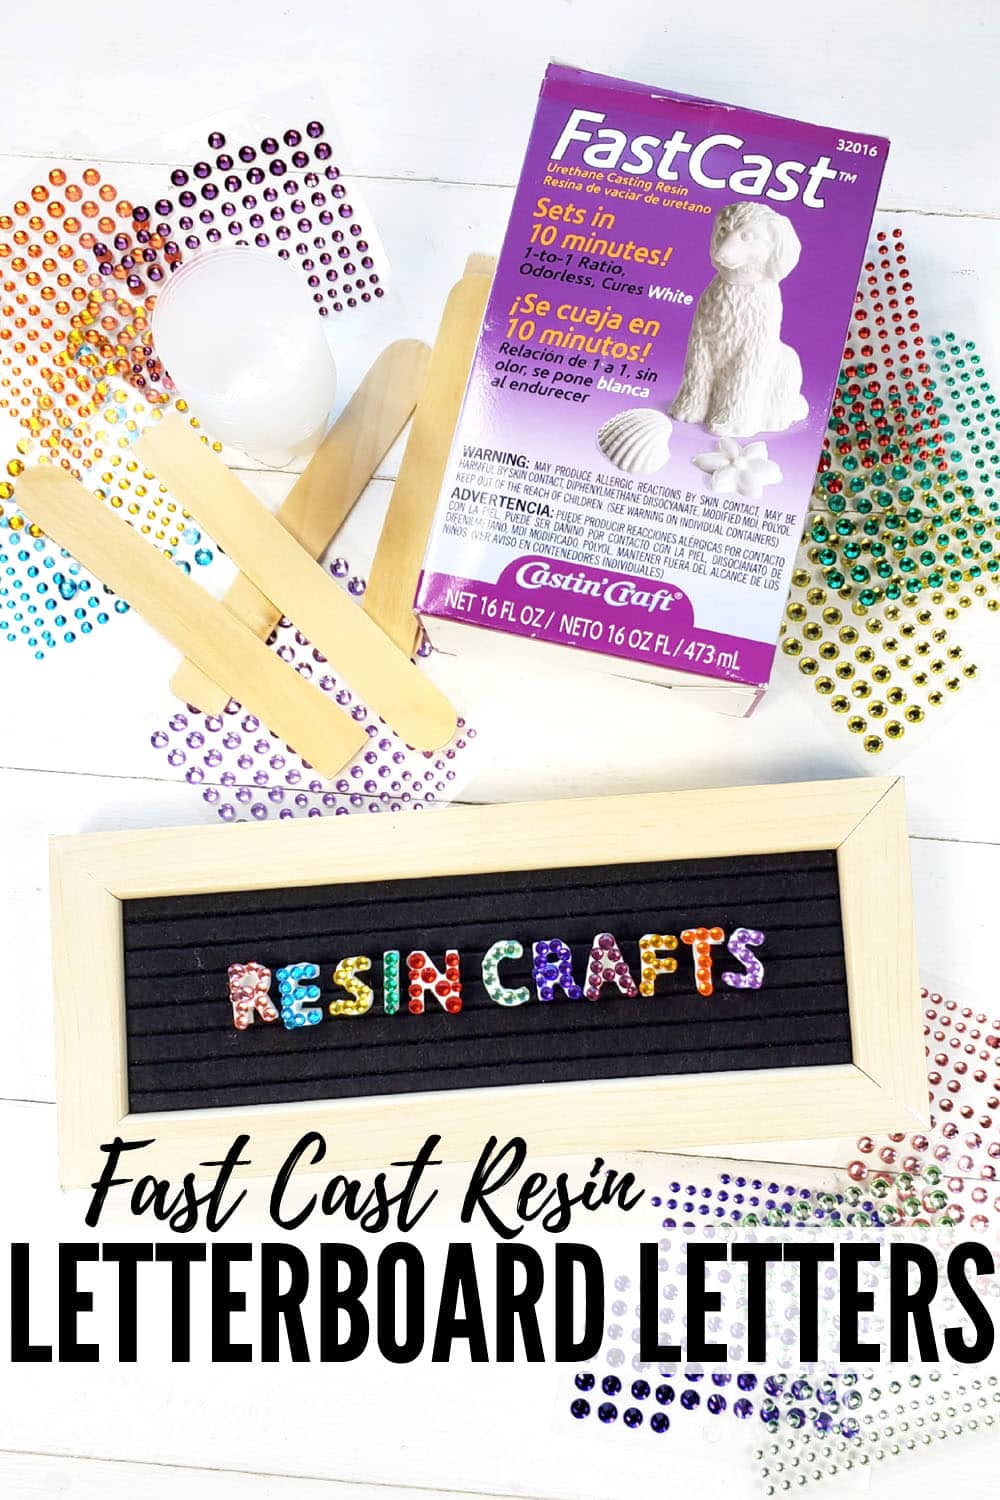 Learn how to make your own resin letterboard letters using Fast Cast resin, some toothpicks, stick-on jewels and just a few minutes! #resincraftsblogbyeti #resincrafts #resin #fastcastresin via @resincraftsblog